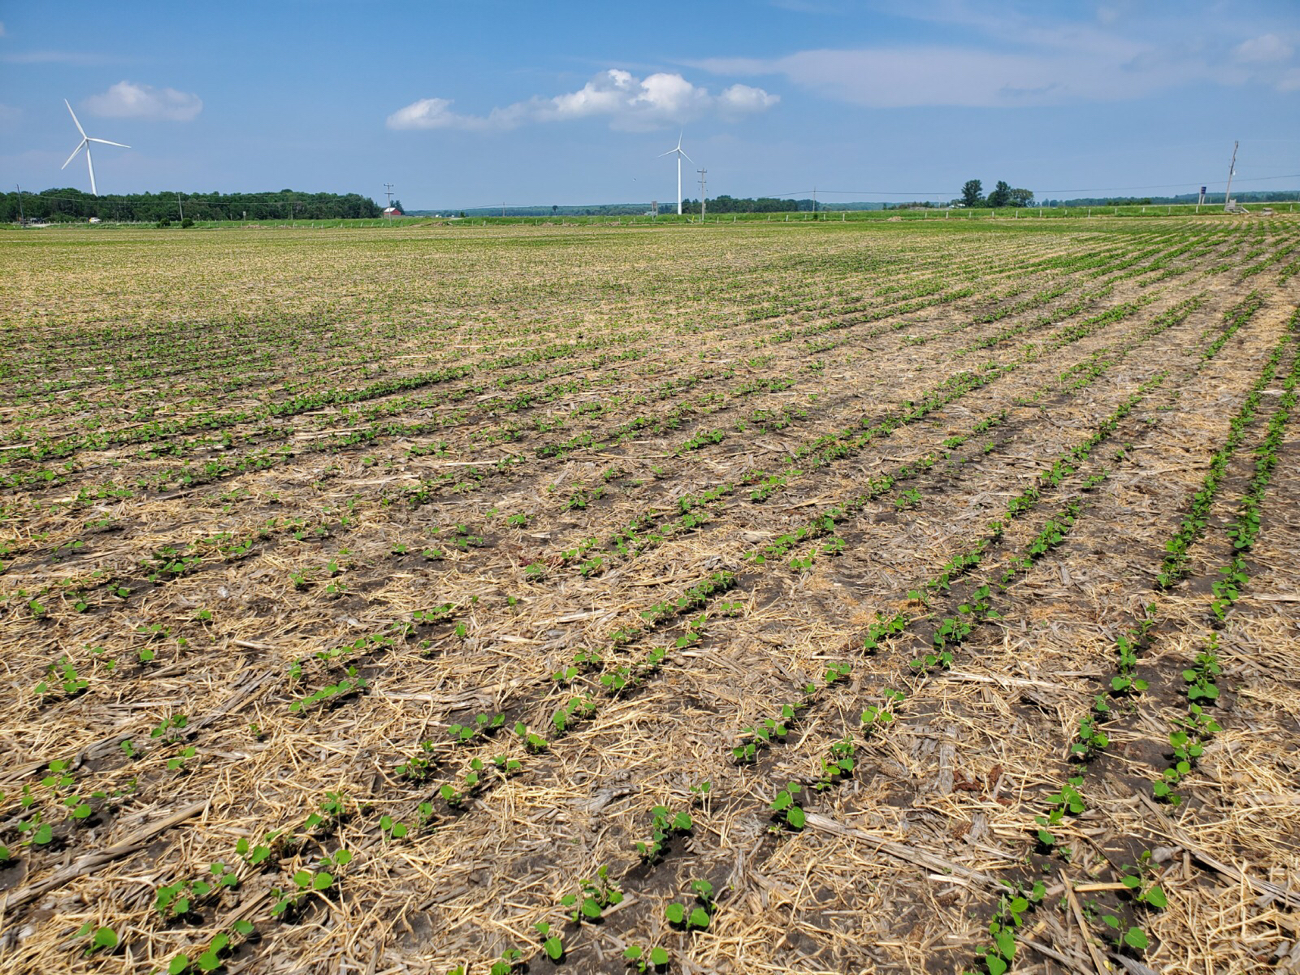 Soybeans, twin row planted